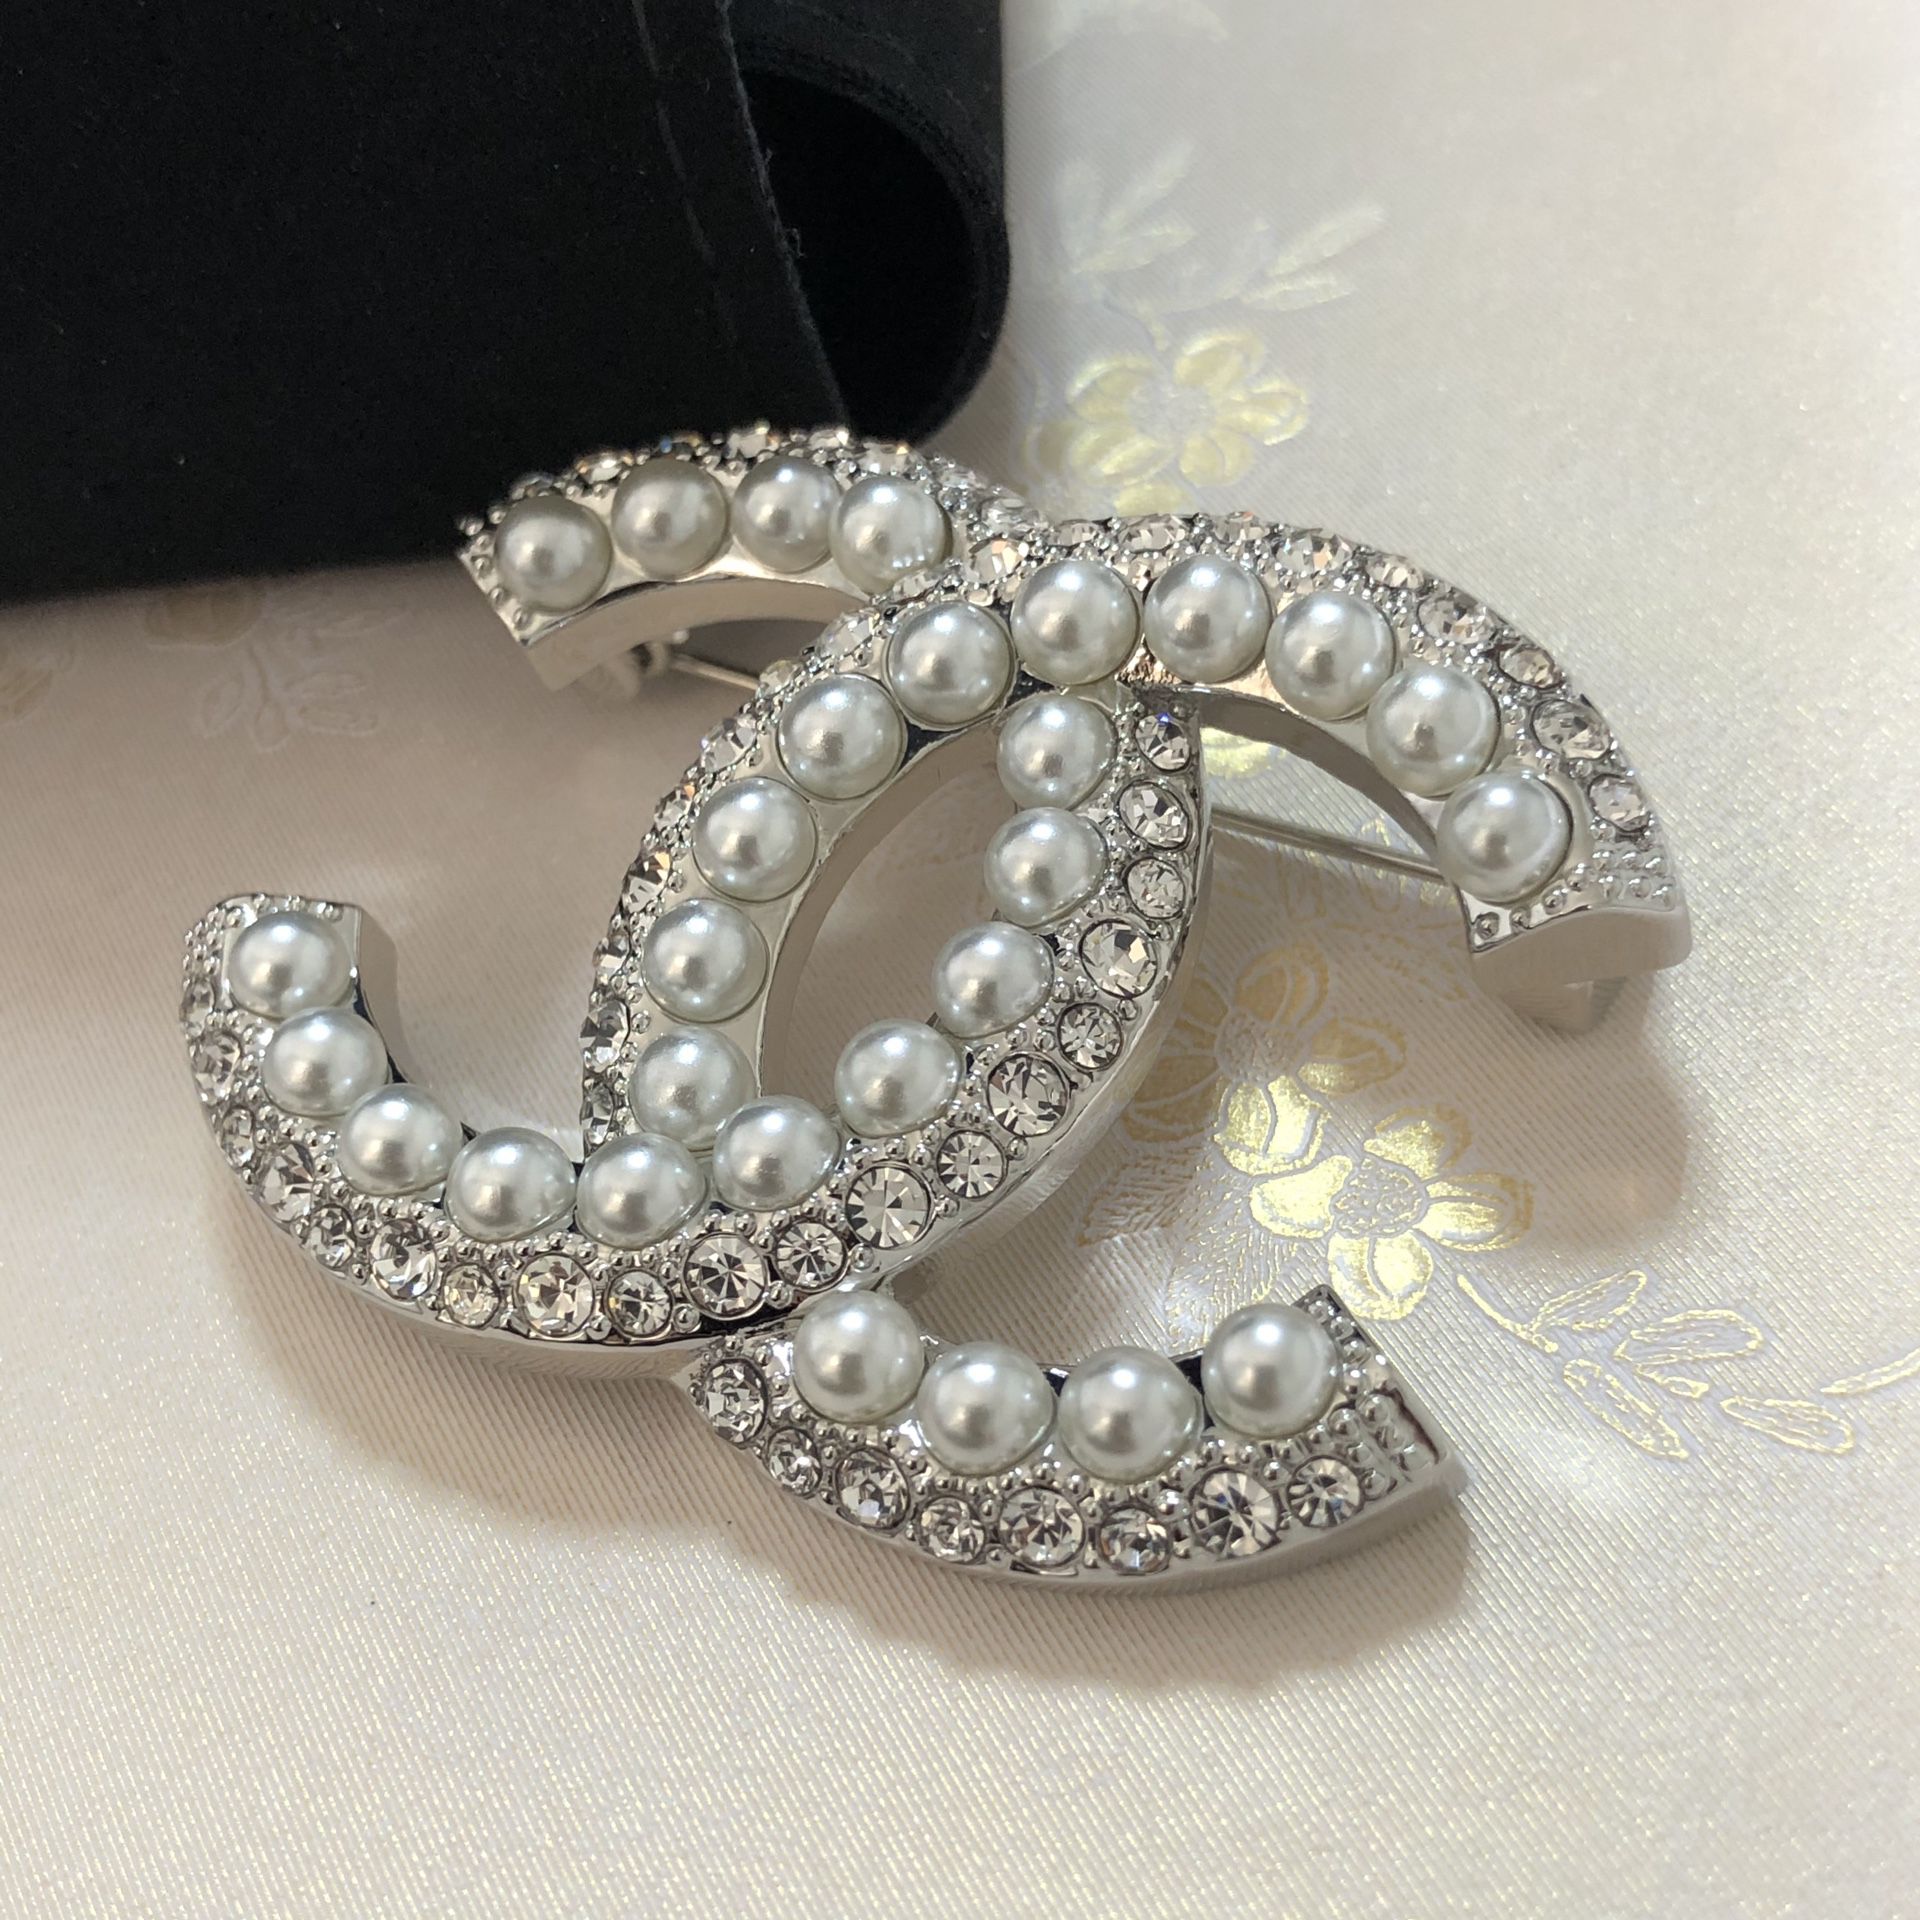 Authentic Chanel Rose Gold Pearl Earrings for Sale in Long Beach, CA -  OfferUp